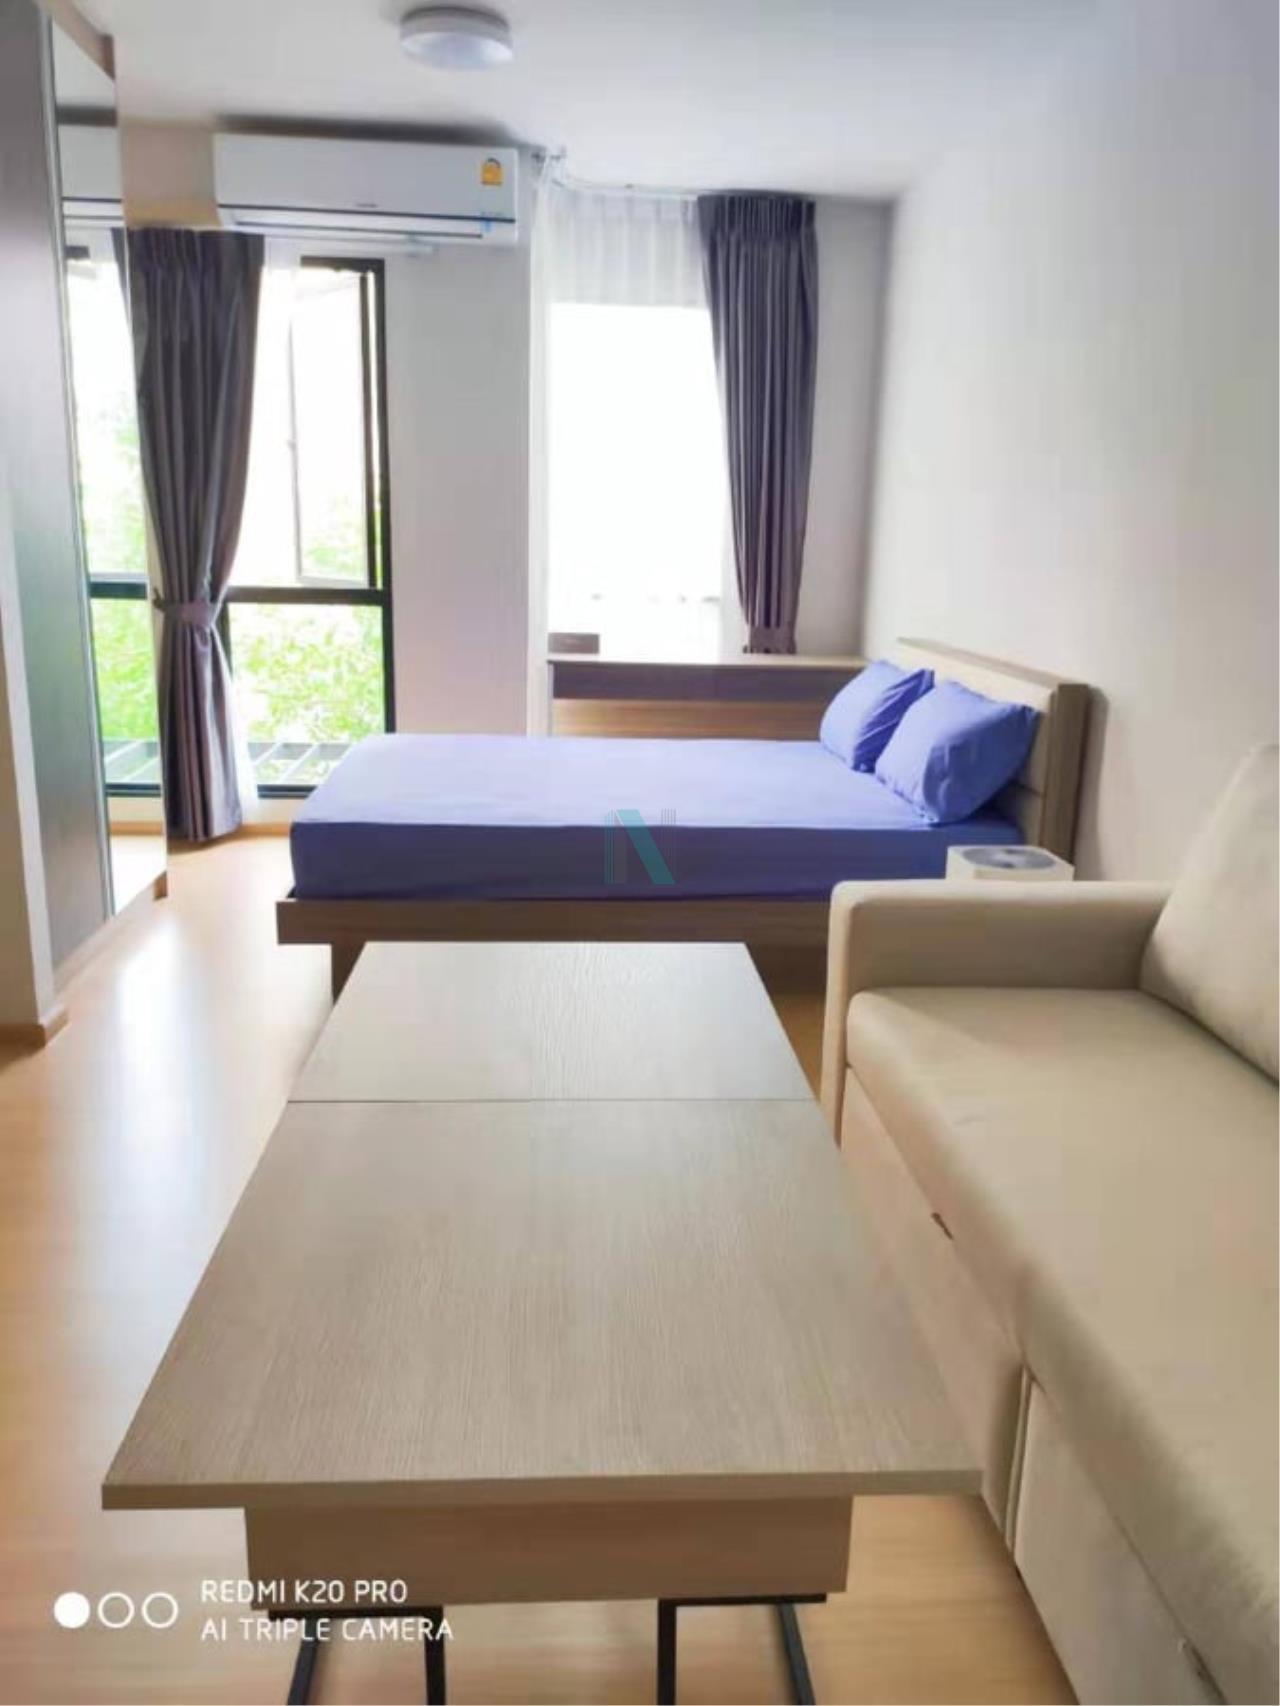 For rent Condo Unio72 Phase 2 Studio size 2758 sqm fully furnished ready to move in